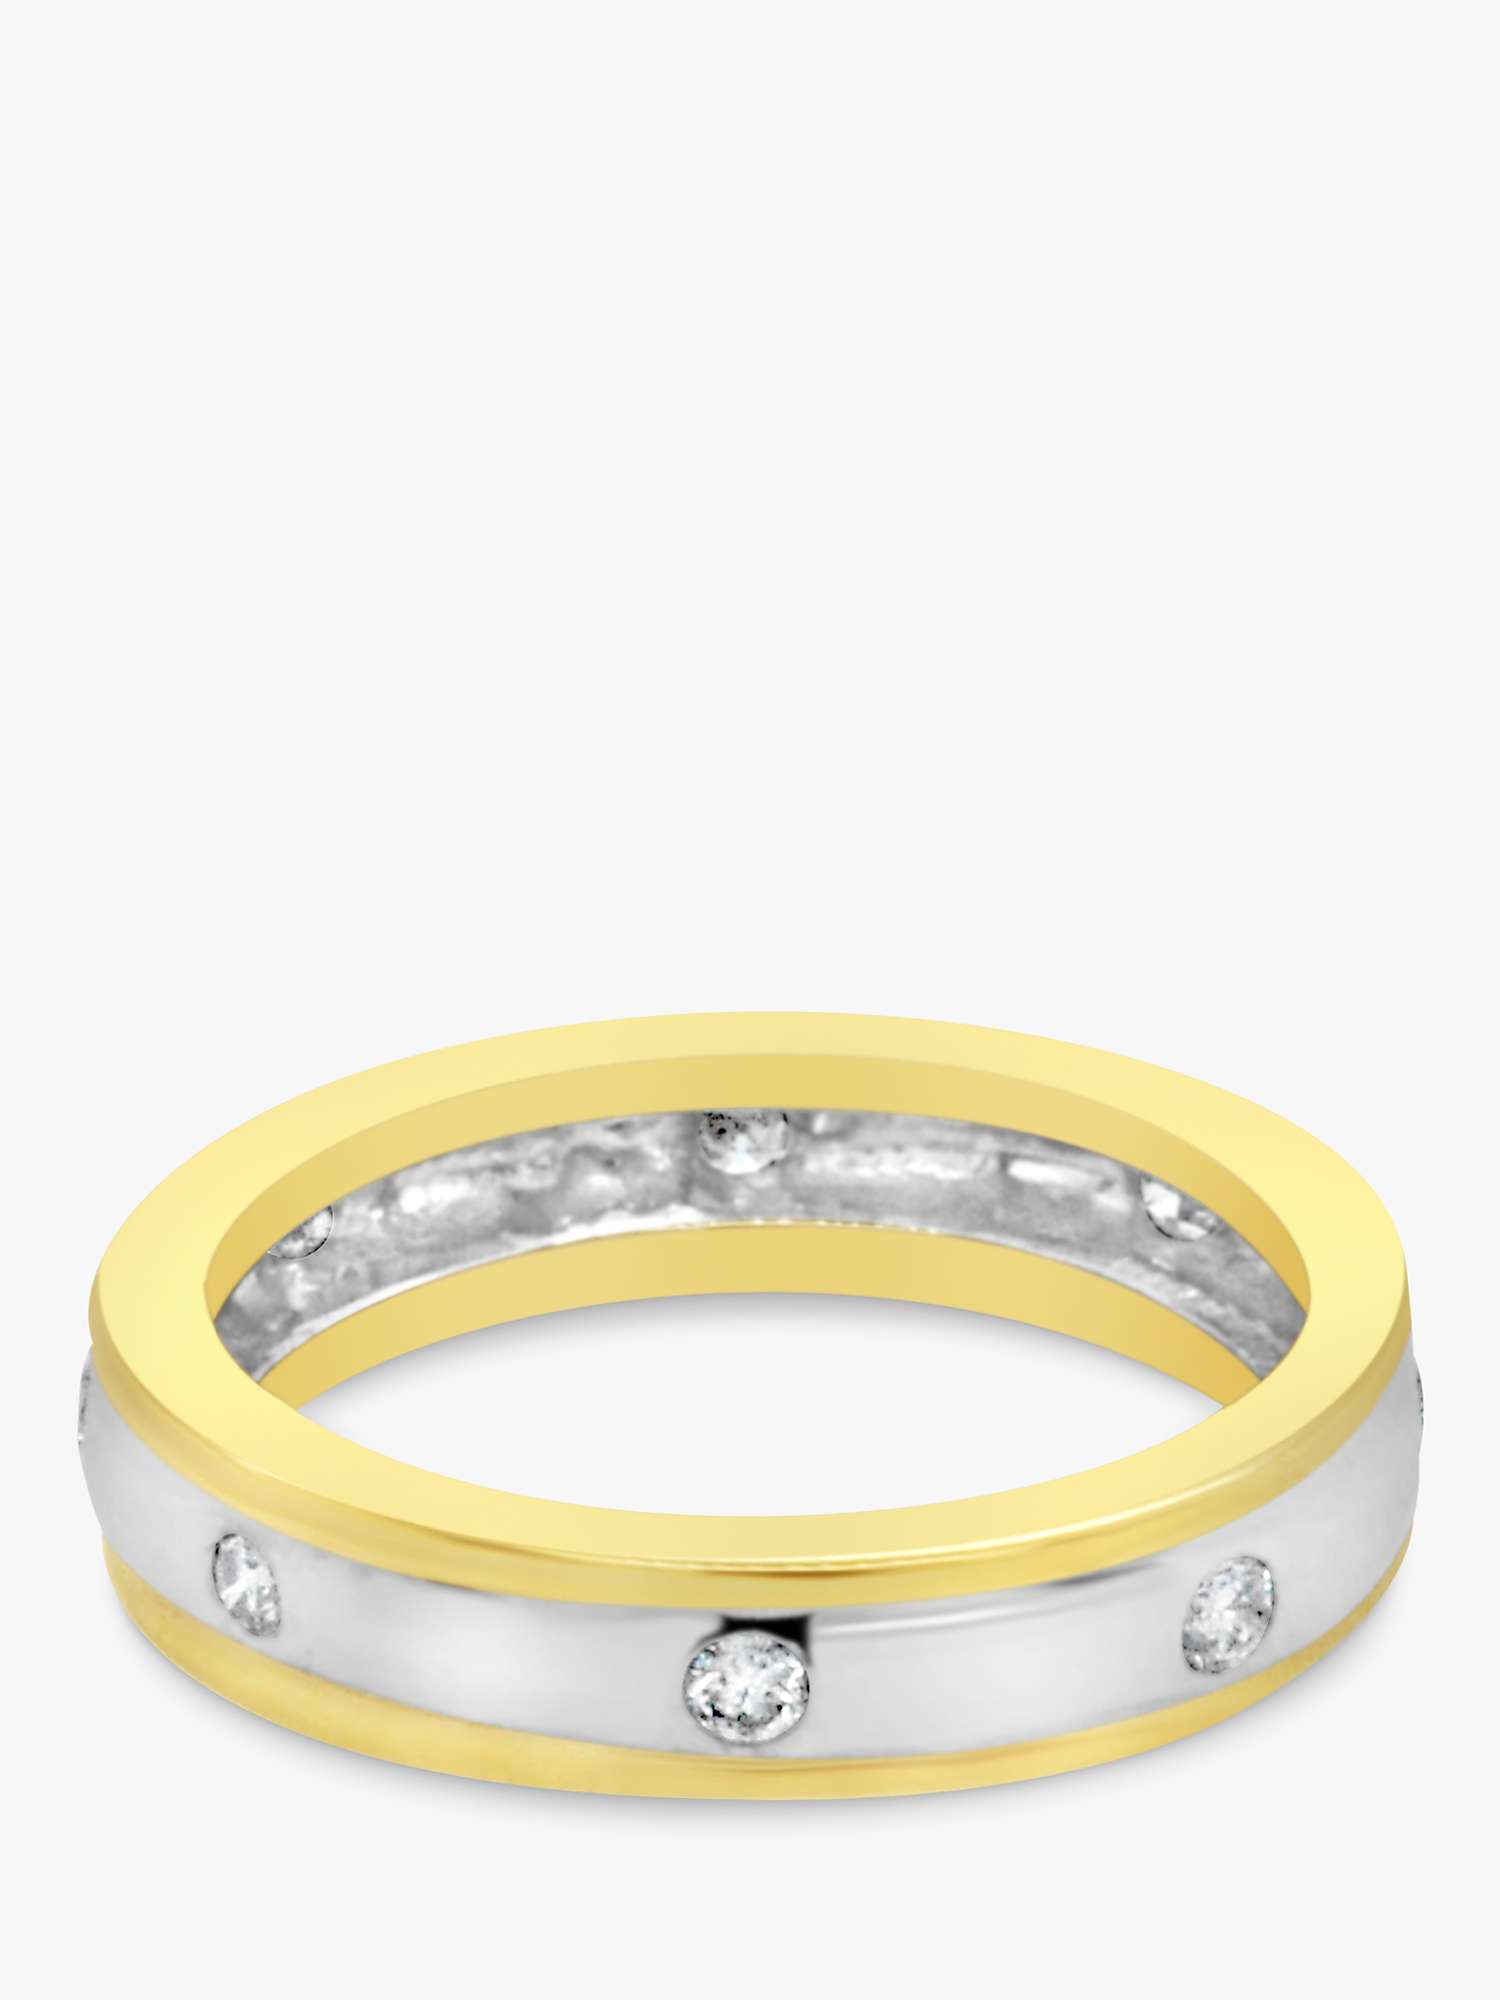 Buy Milton & Humble Jewellery Second Hand 9ct White and Yellow Gold Diamond Band Ring Online at johnlewis.com